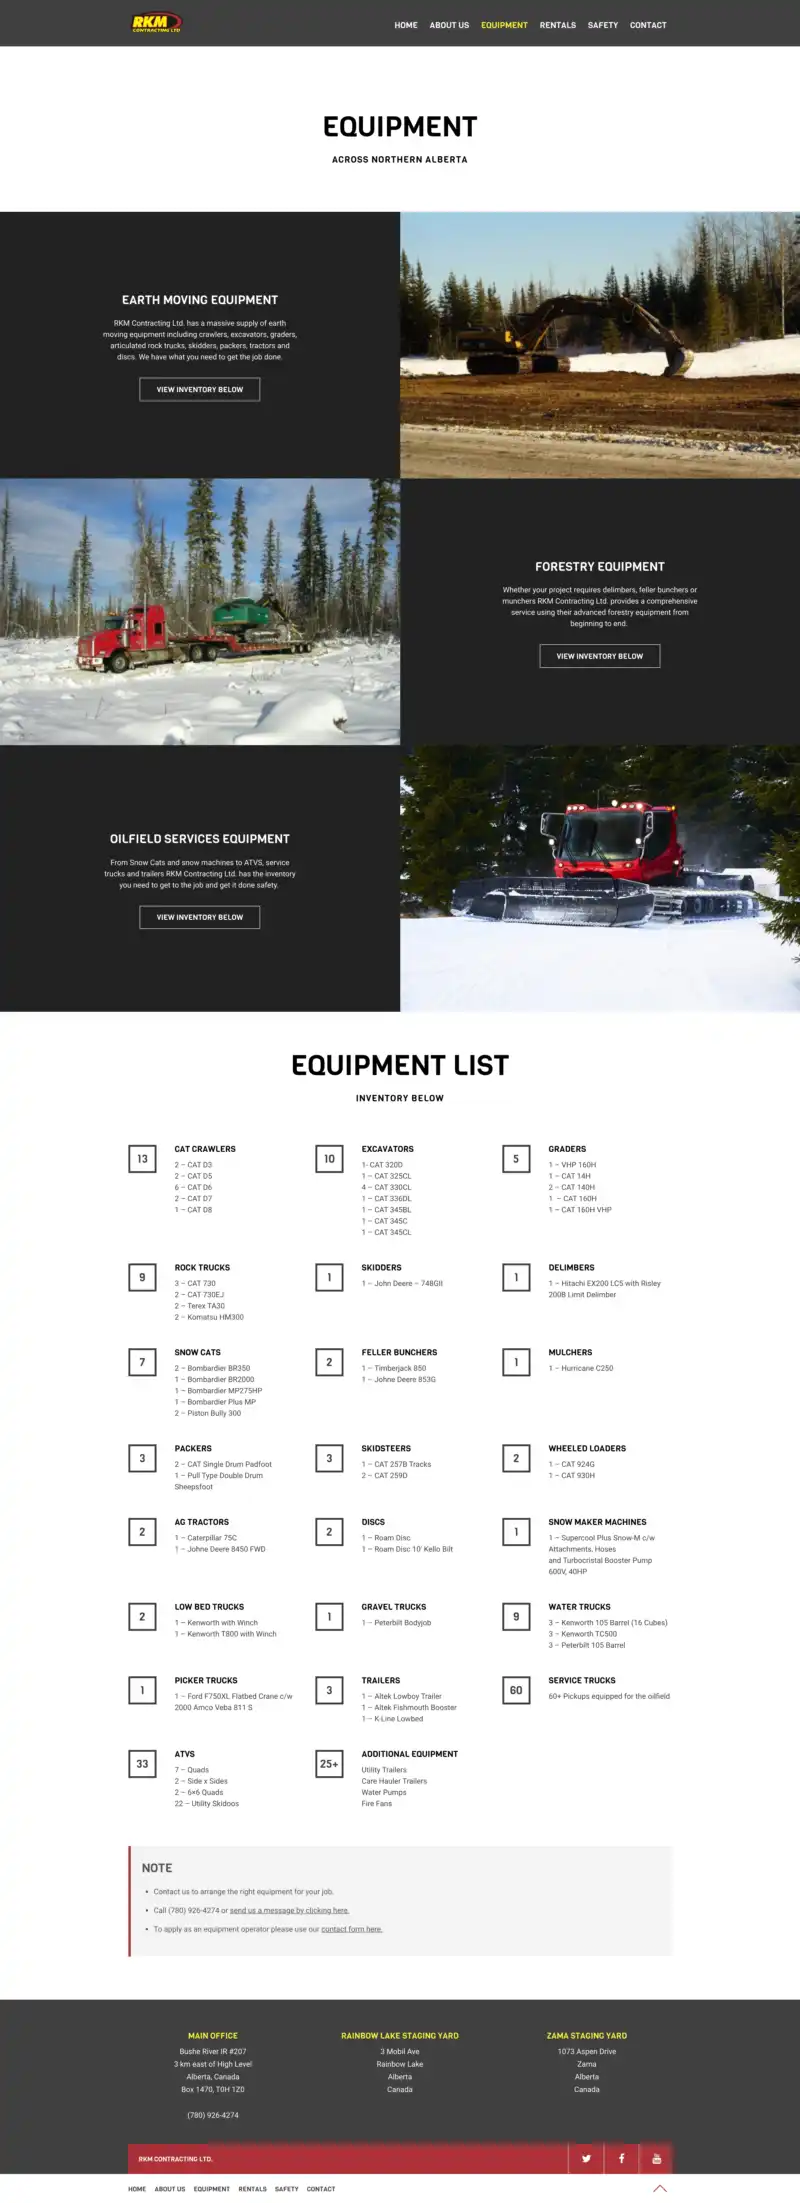 RKM Contracting Ltd. Equipment Page